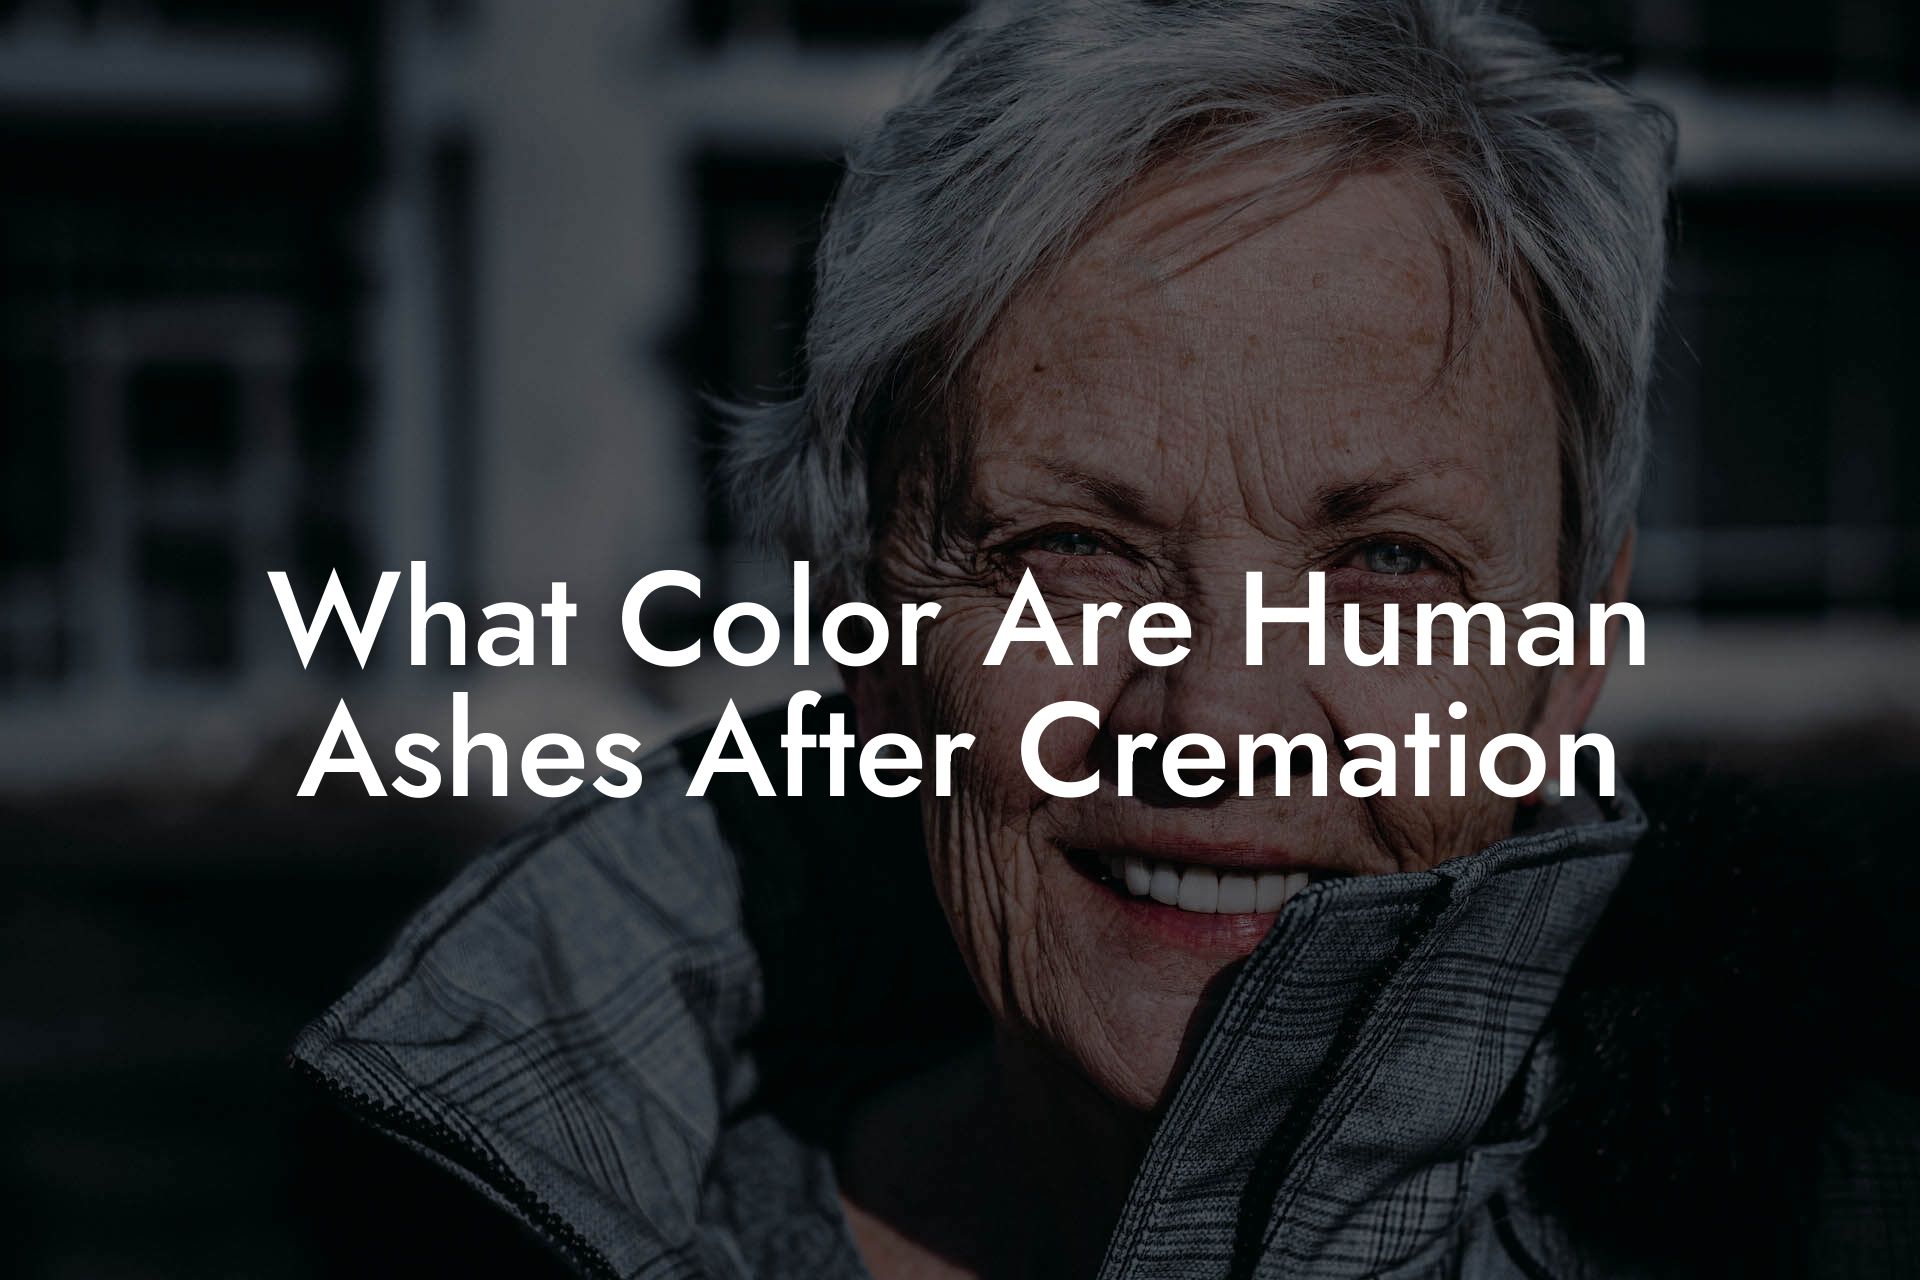 What Color Are Human Ashes After Cremation